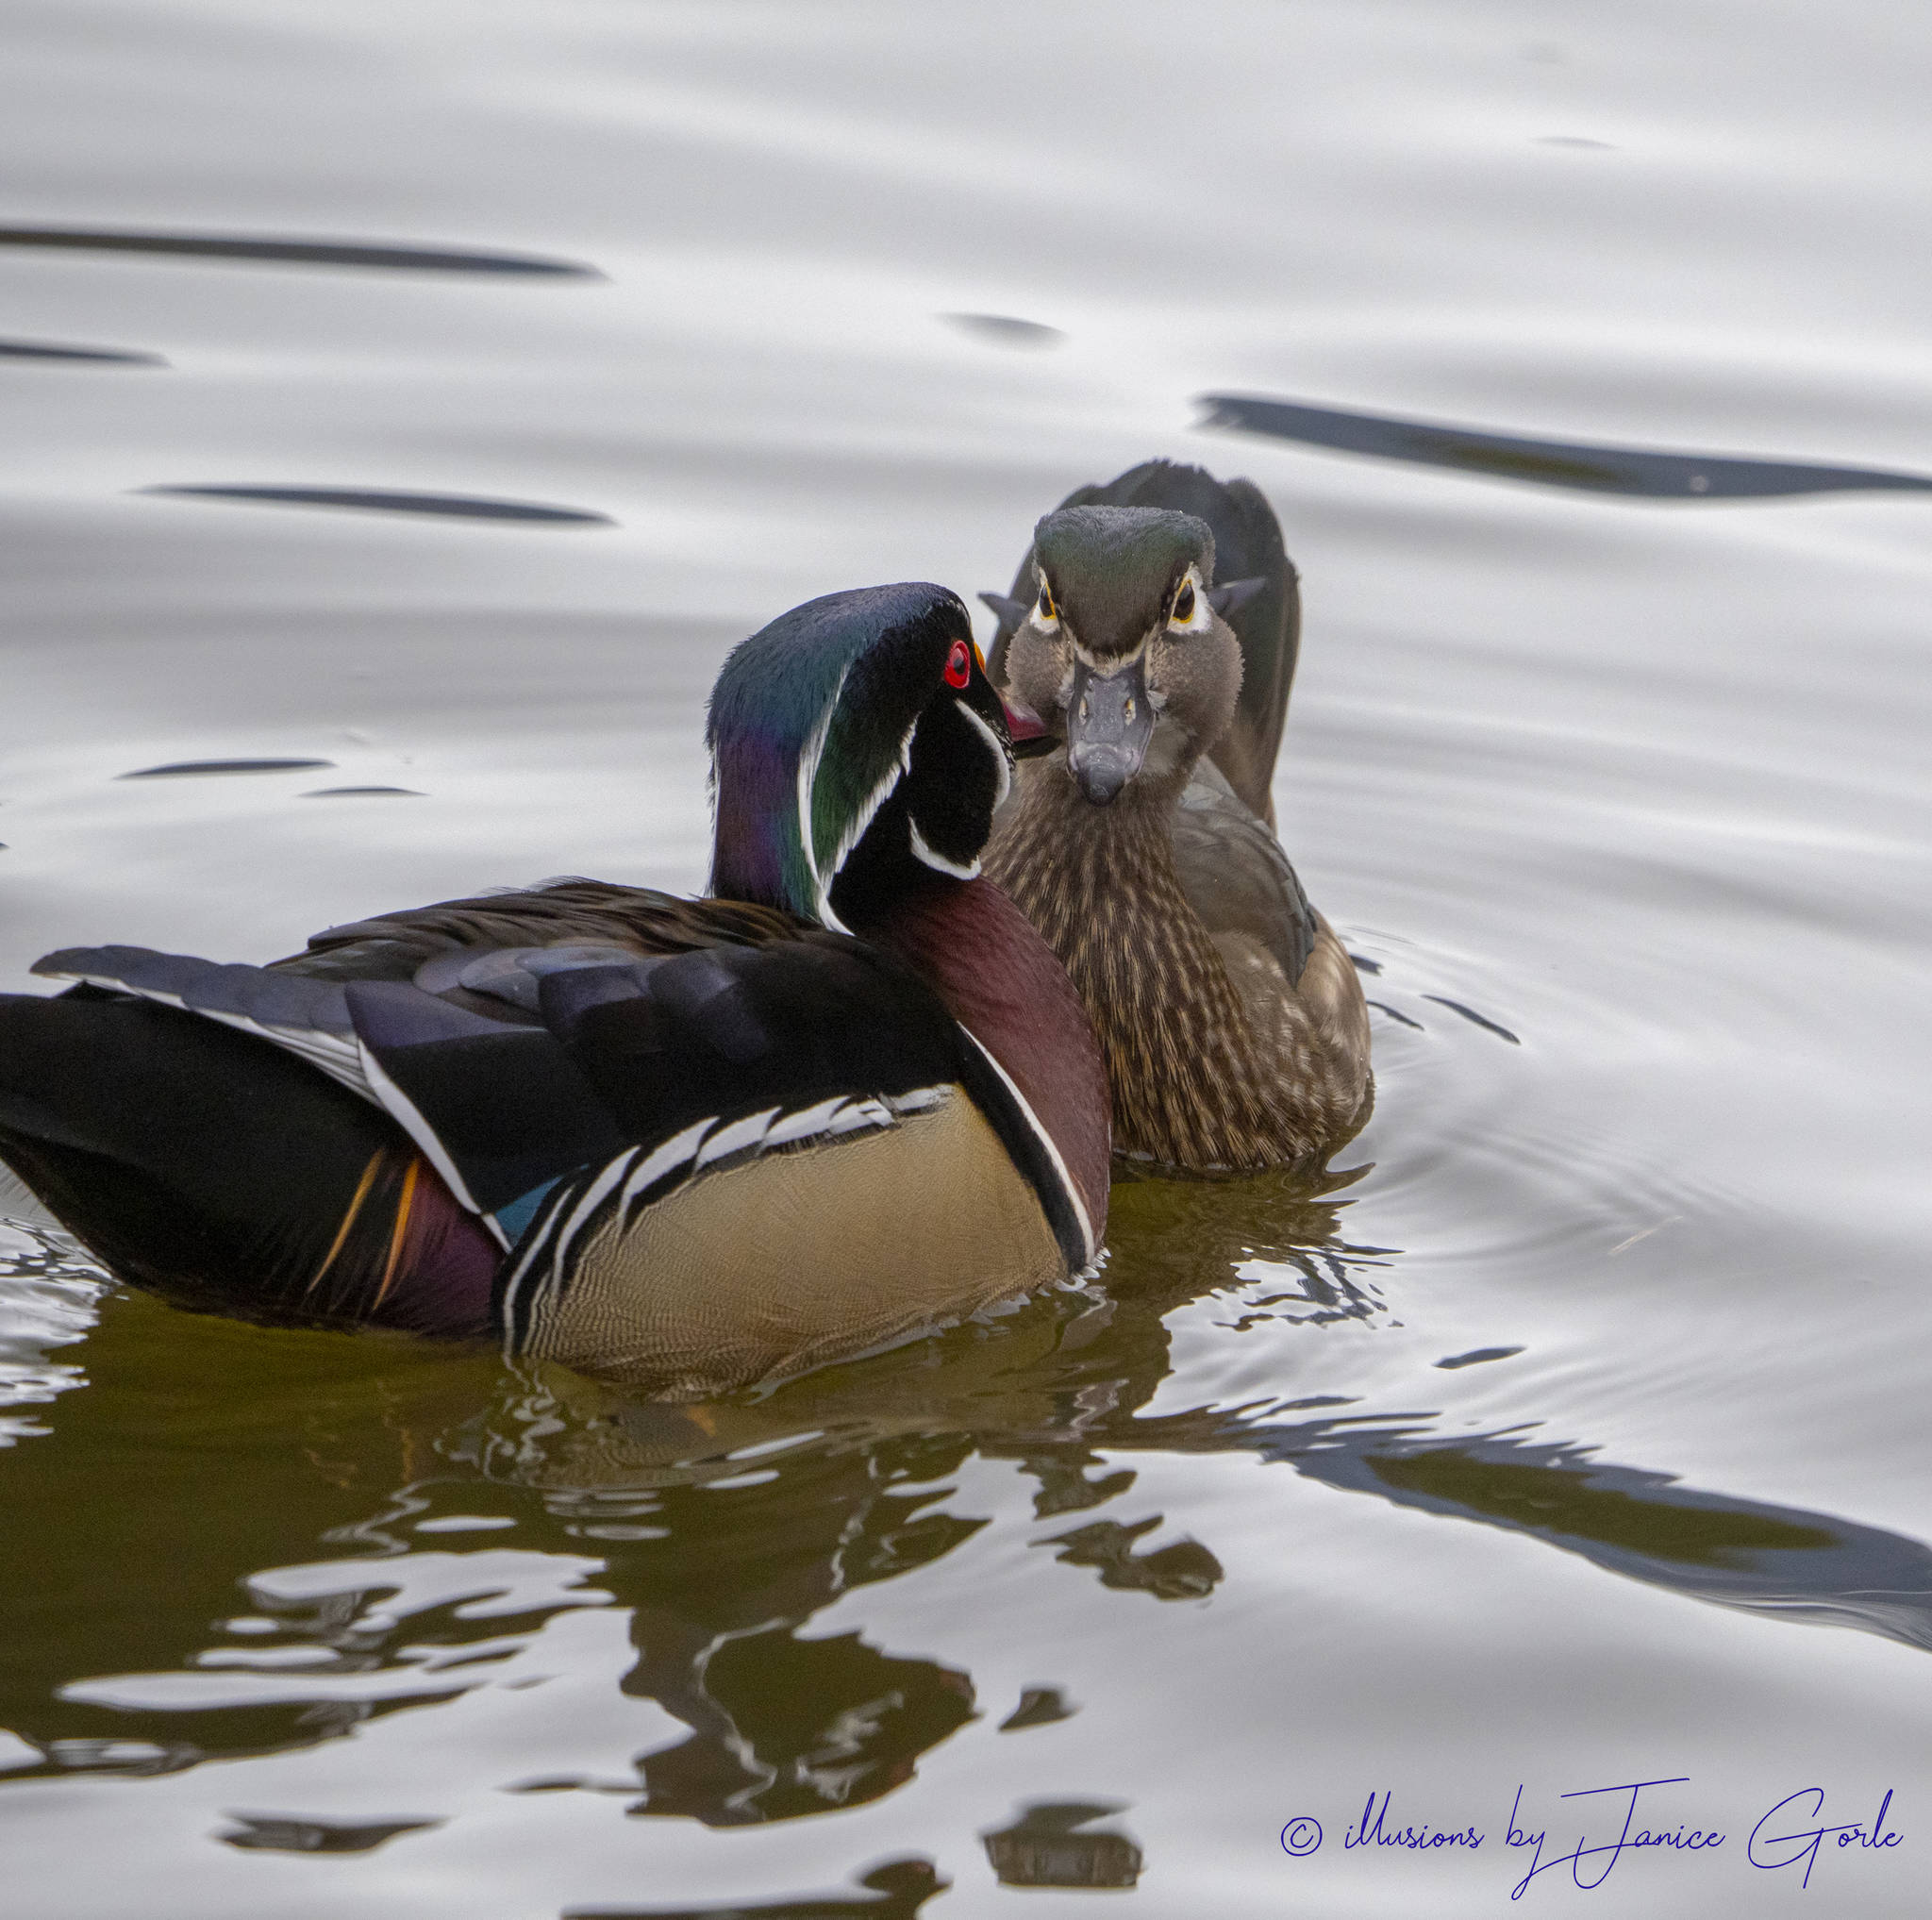 Wood ducks at Rotary Park in Juneau. (Courtesy Photo | Janice Gorle)